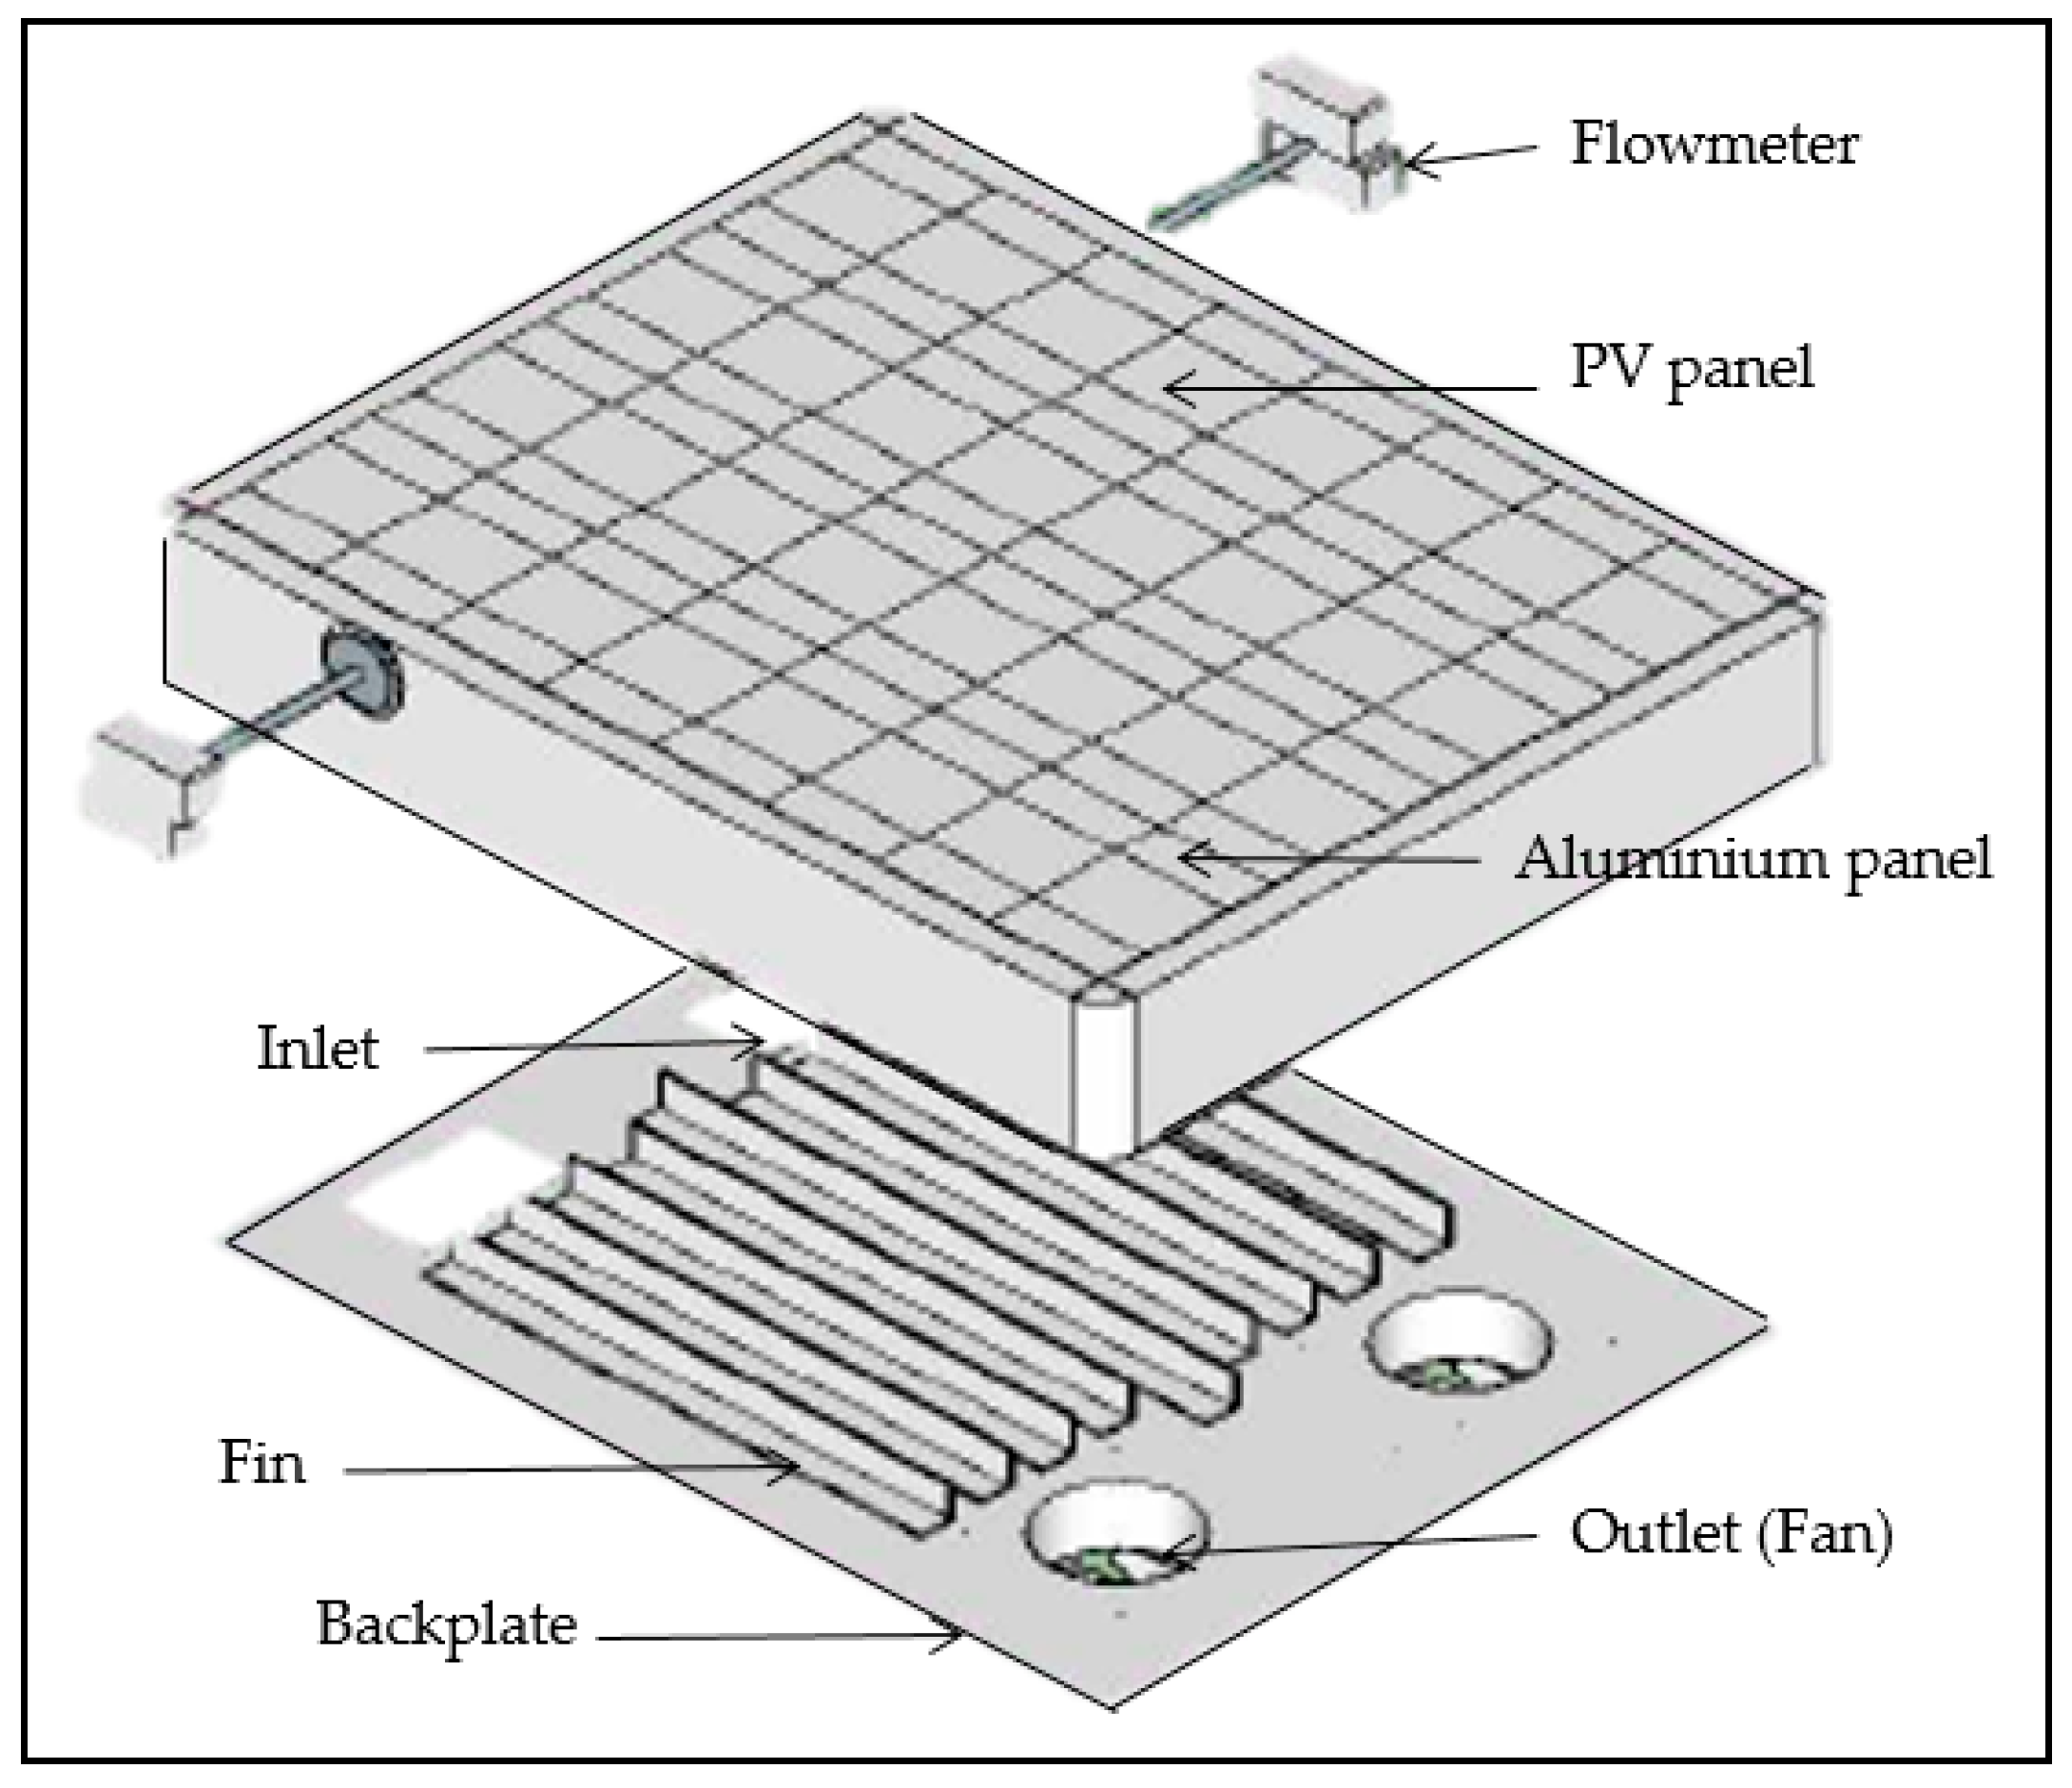 PDF) A Mathematical Model of a Solar Collector Augmented by a Flat